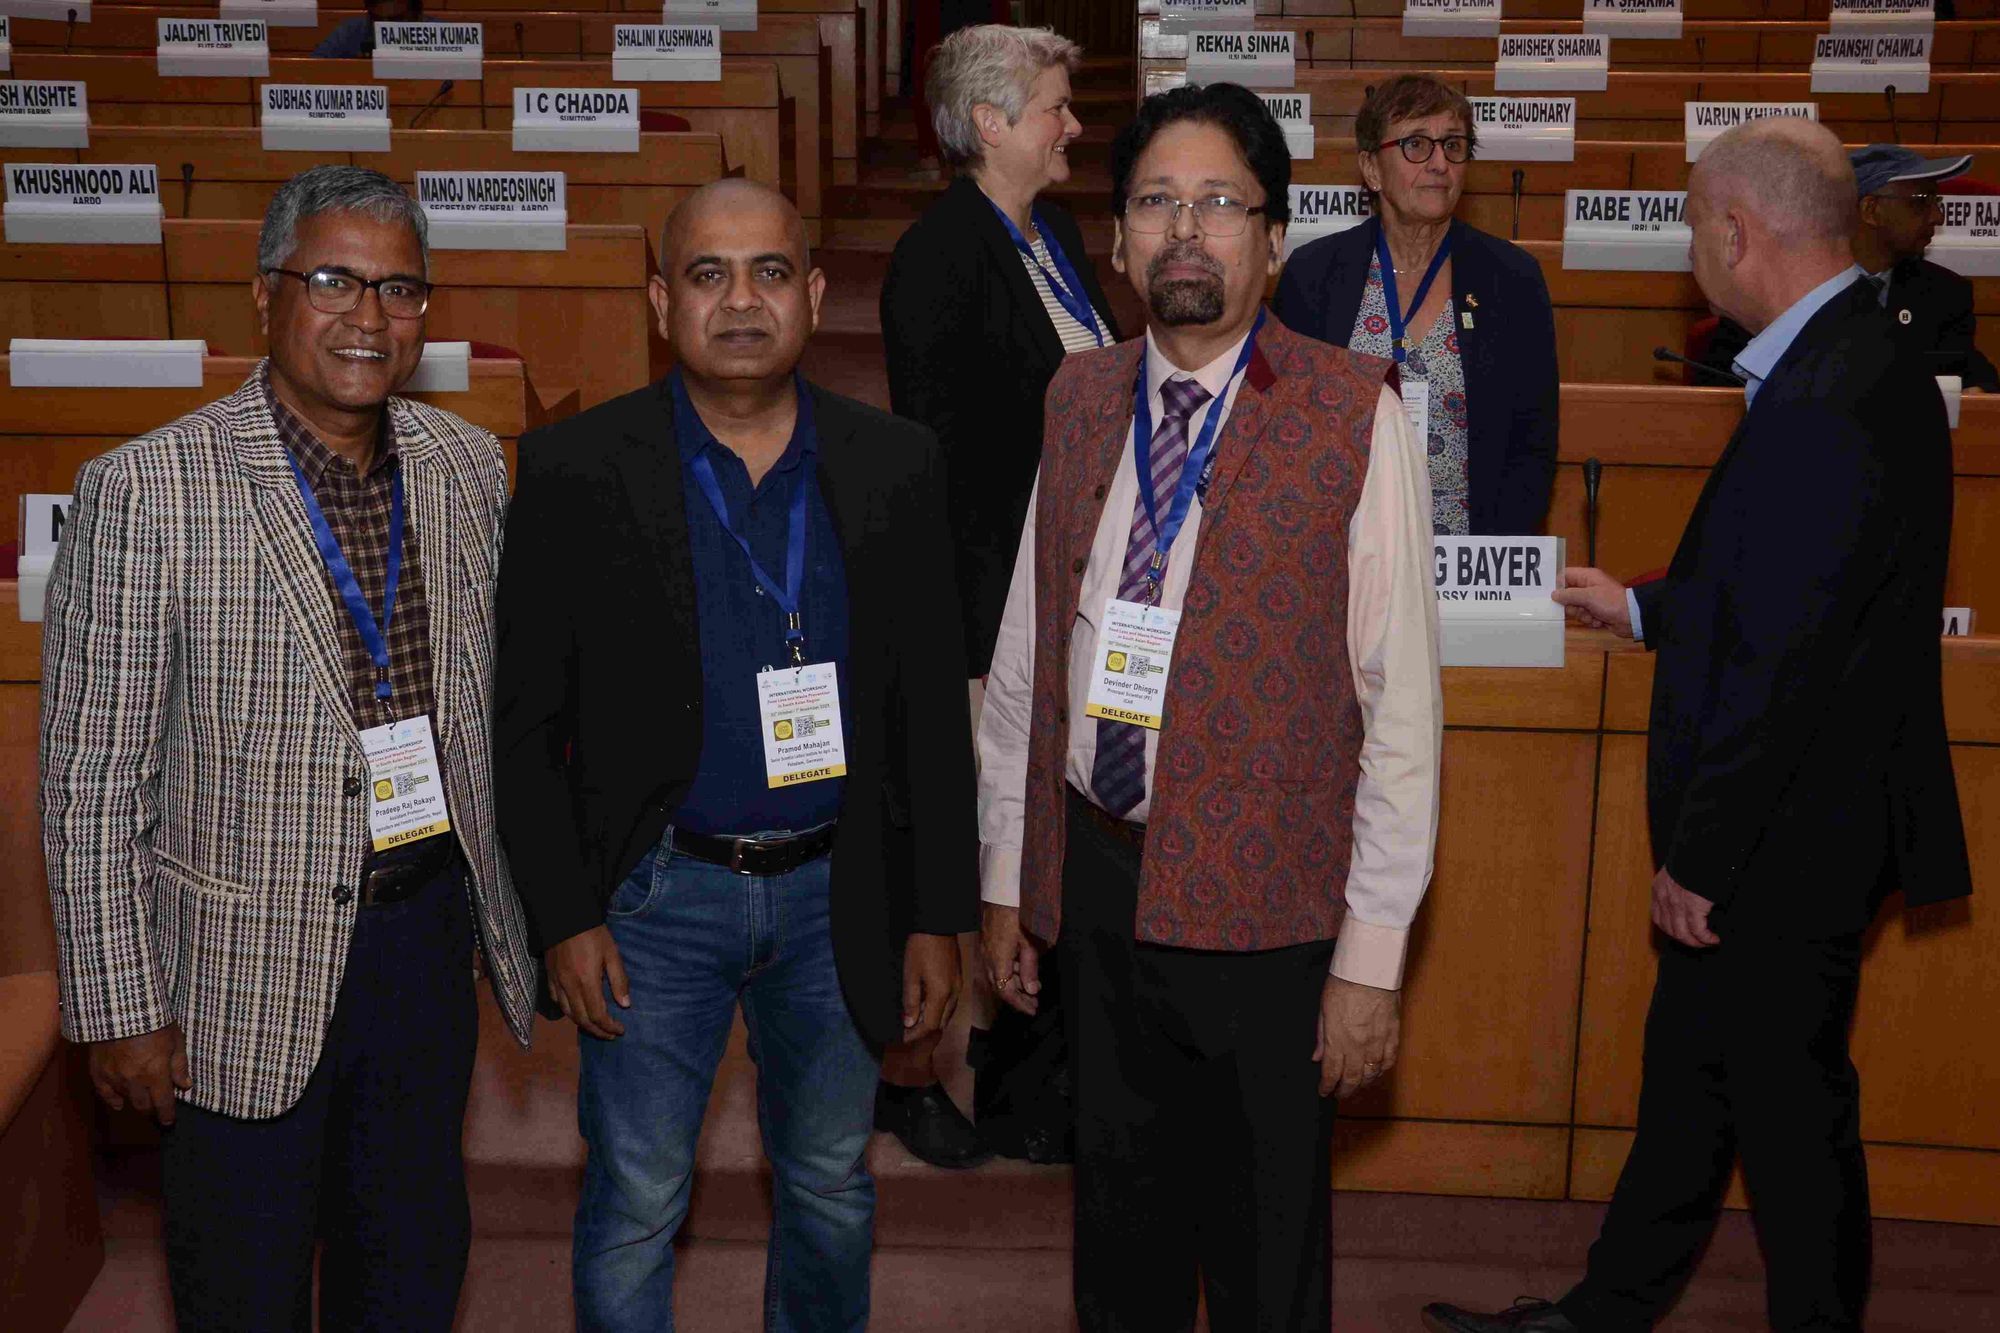 Dr Rokaya, Agriculture and Forestry University Nepal, Dr Mahajan, Leibniz Institute Germany, Dr Devinder Dhingra, Indian Council of Agricultural Research, during the lunch break.